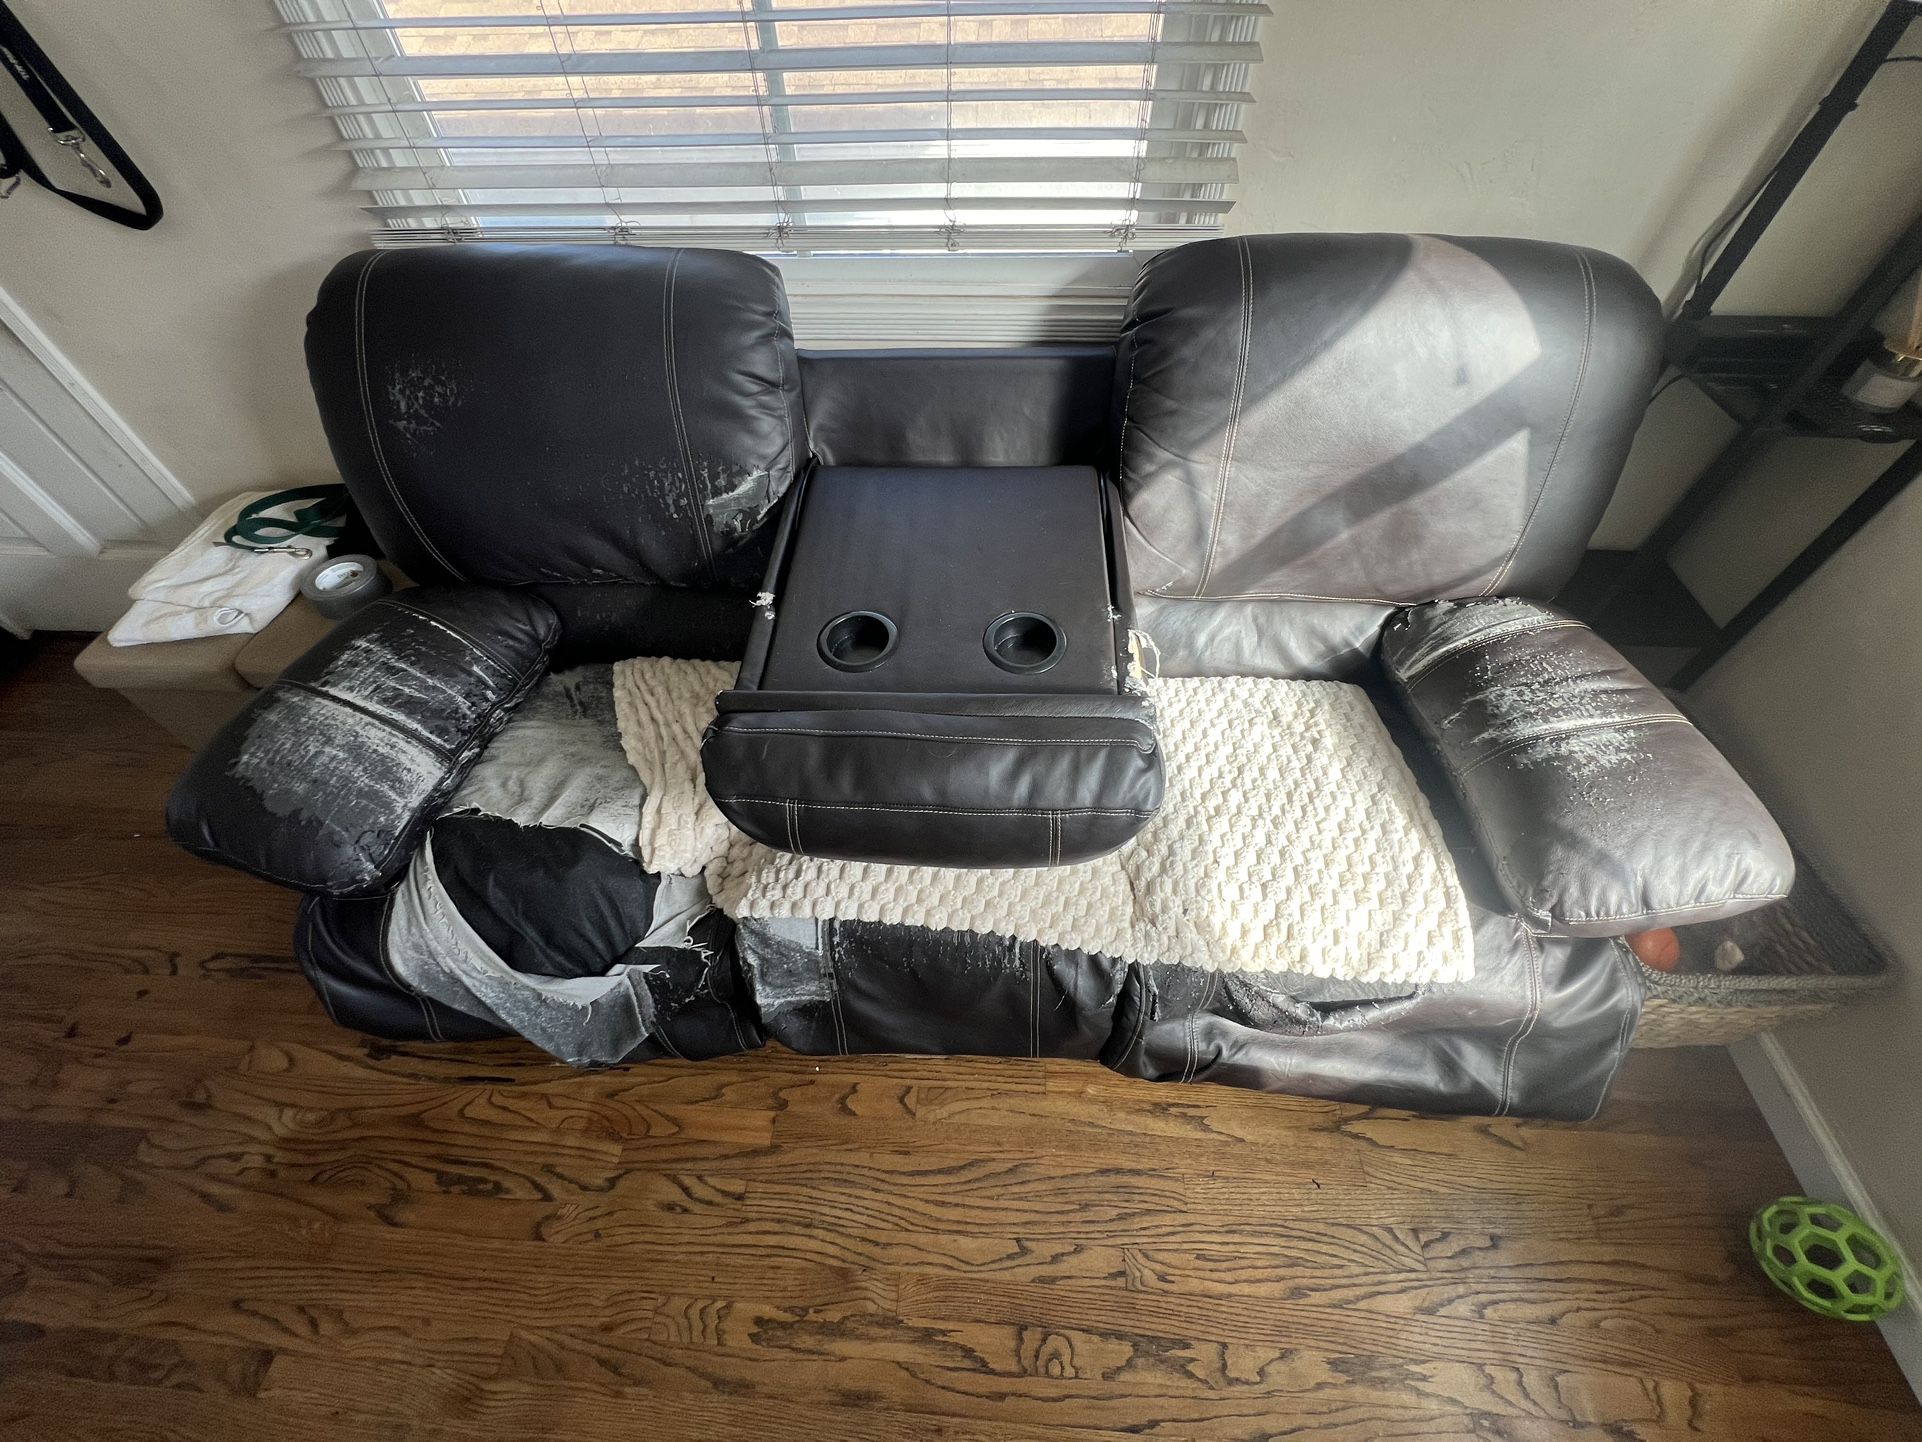 Free Couch to a Good Home!